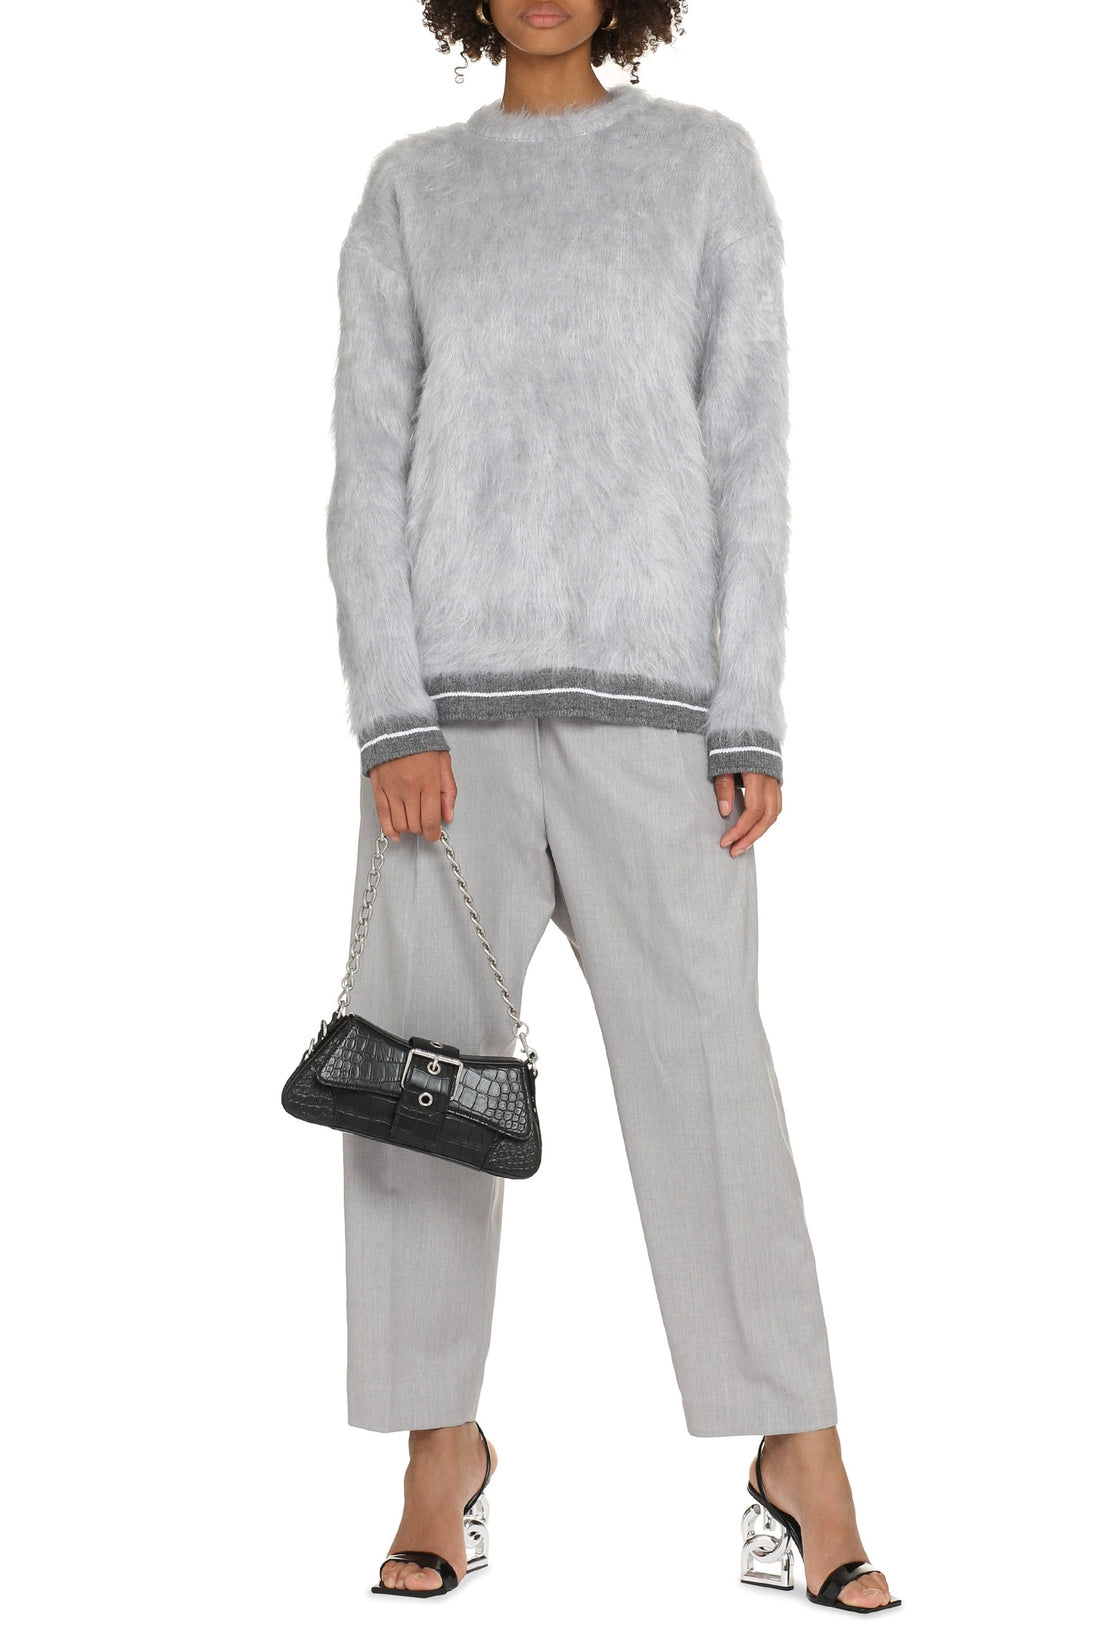 Givenchy-OUTLET-SALE-Mohair blend sweater-ARCHIVIST